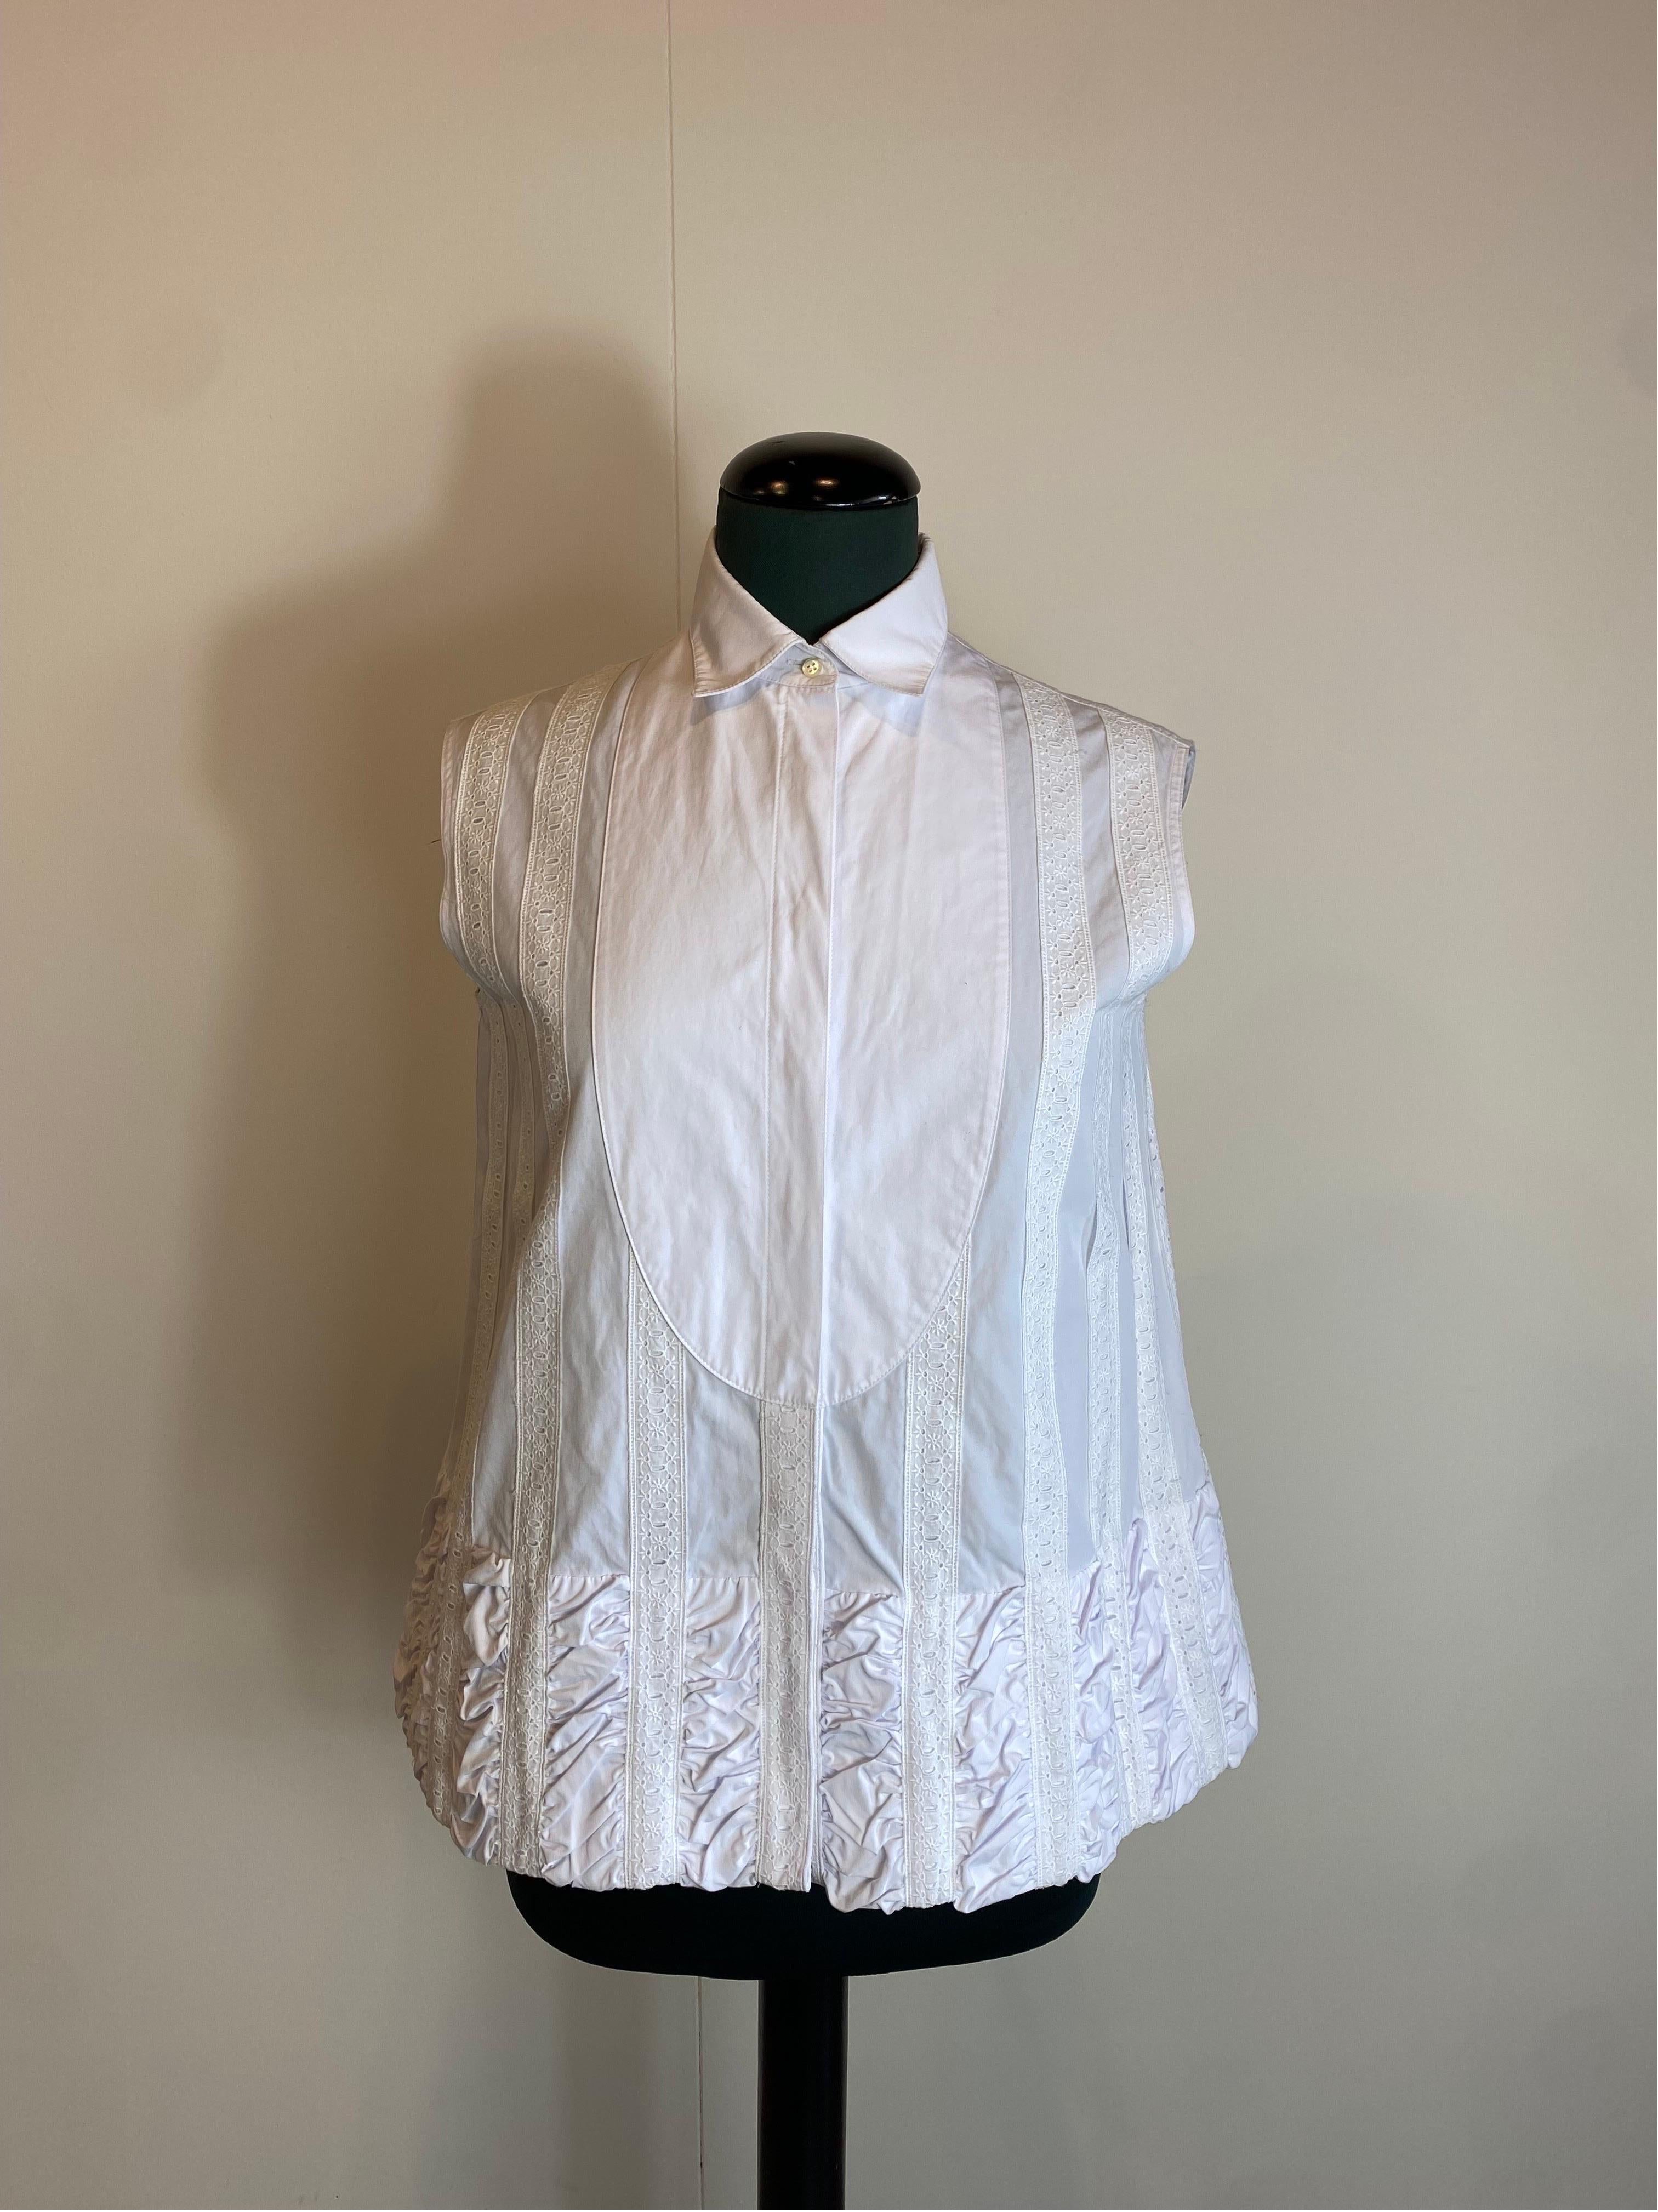 Alaia Paris blouse.
Made of polyester and cotton.
Size label missing.
Wears an international M.
Shoulders 40 cm
Bust 46 cm
Length 60 cm
Good general condition, shows signs of normal use.
It has some pulled threads and some marks on the collar as